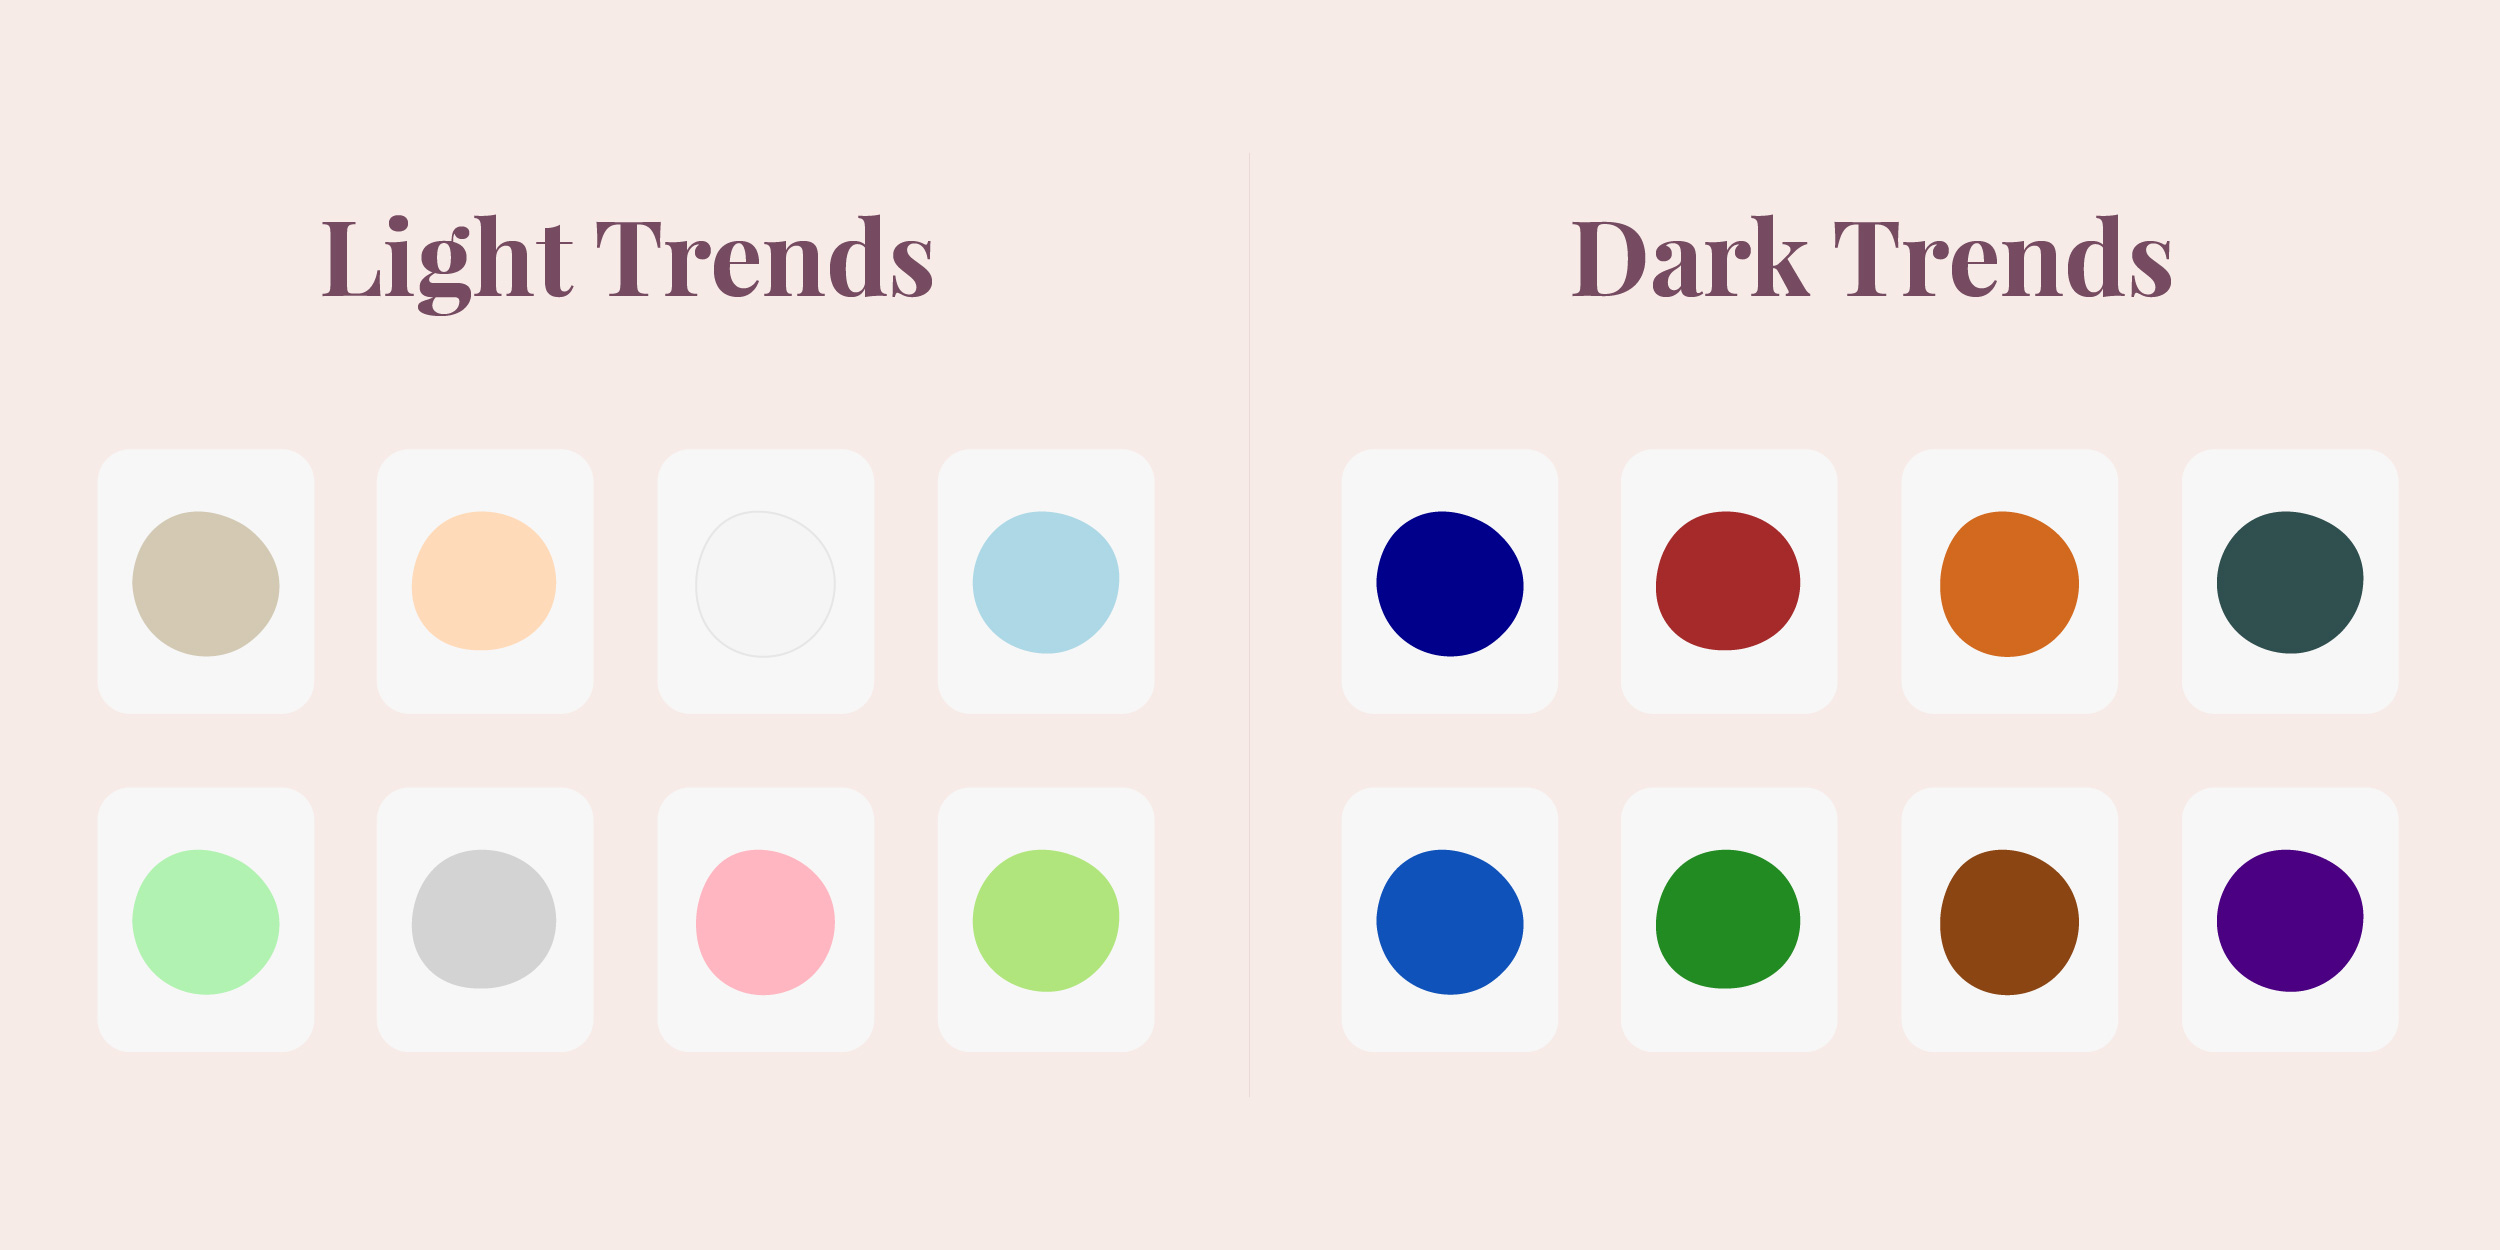 A diagram outlining light color trends and dark color trends